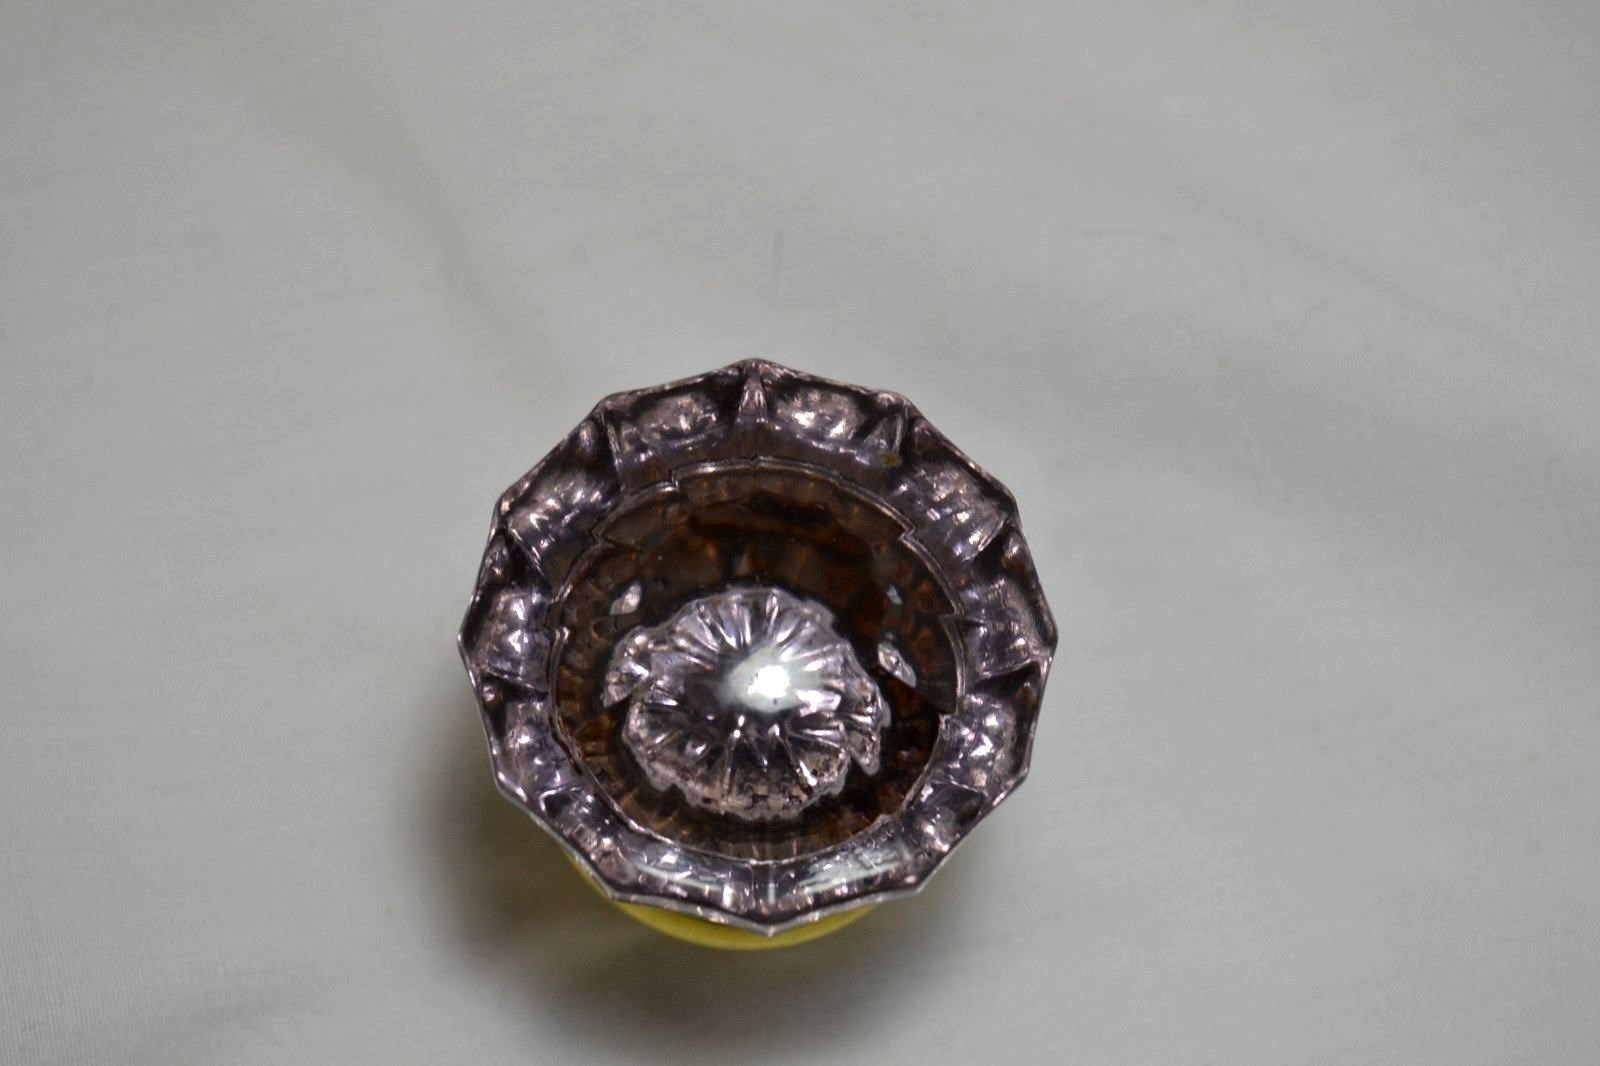 Antique Purple Amethyst Crystal Glass Door Knob Victorian 12 Sided Architectural